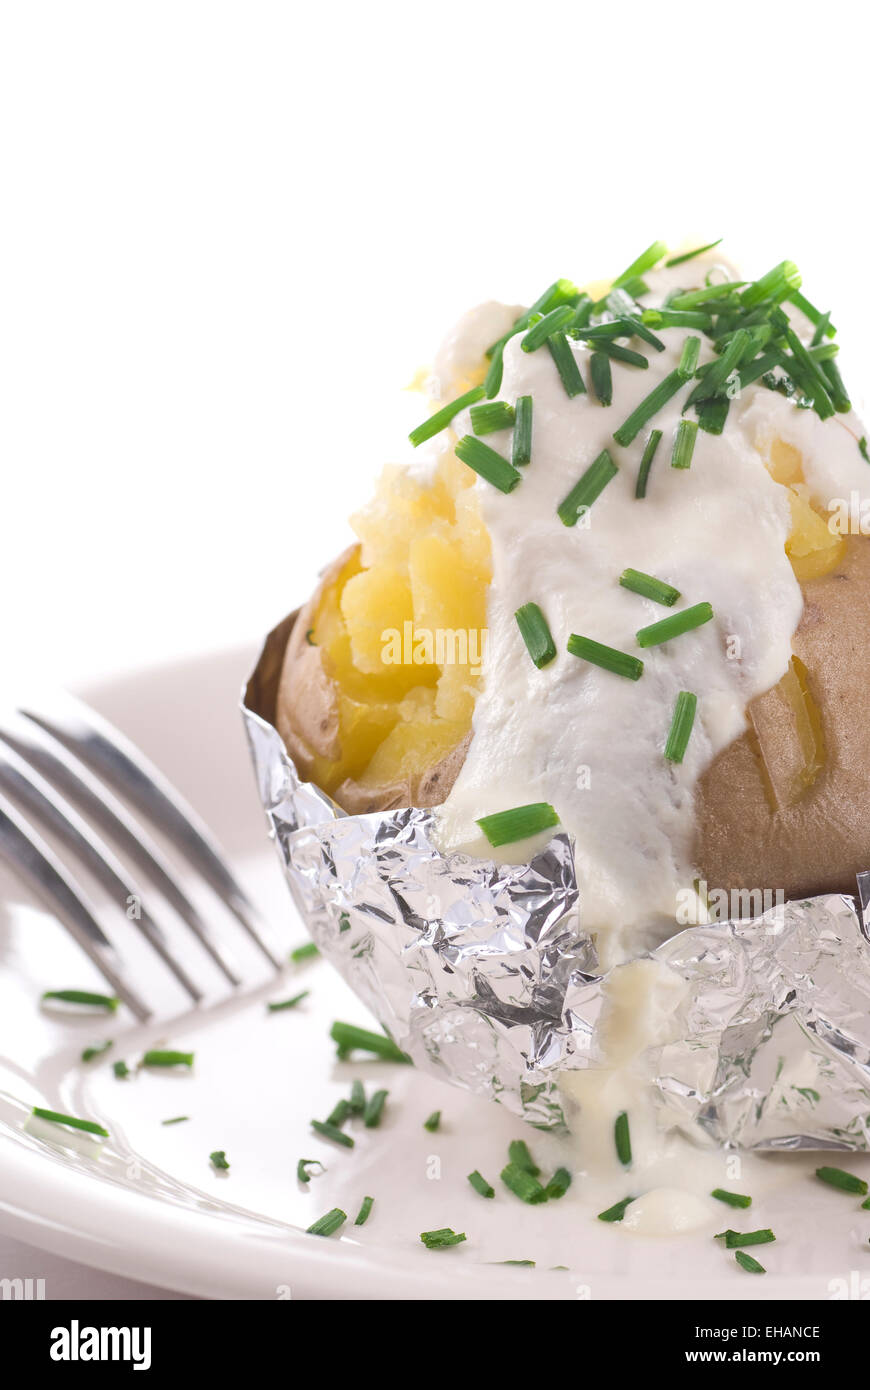 Baked potato with sour cream and chive Stock Photo